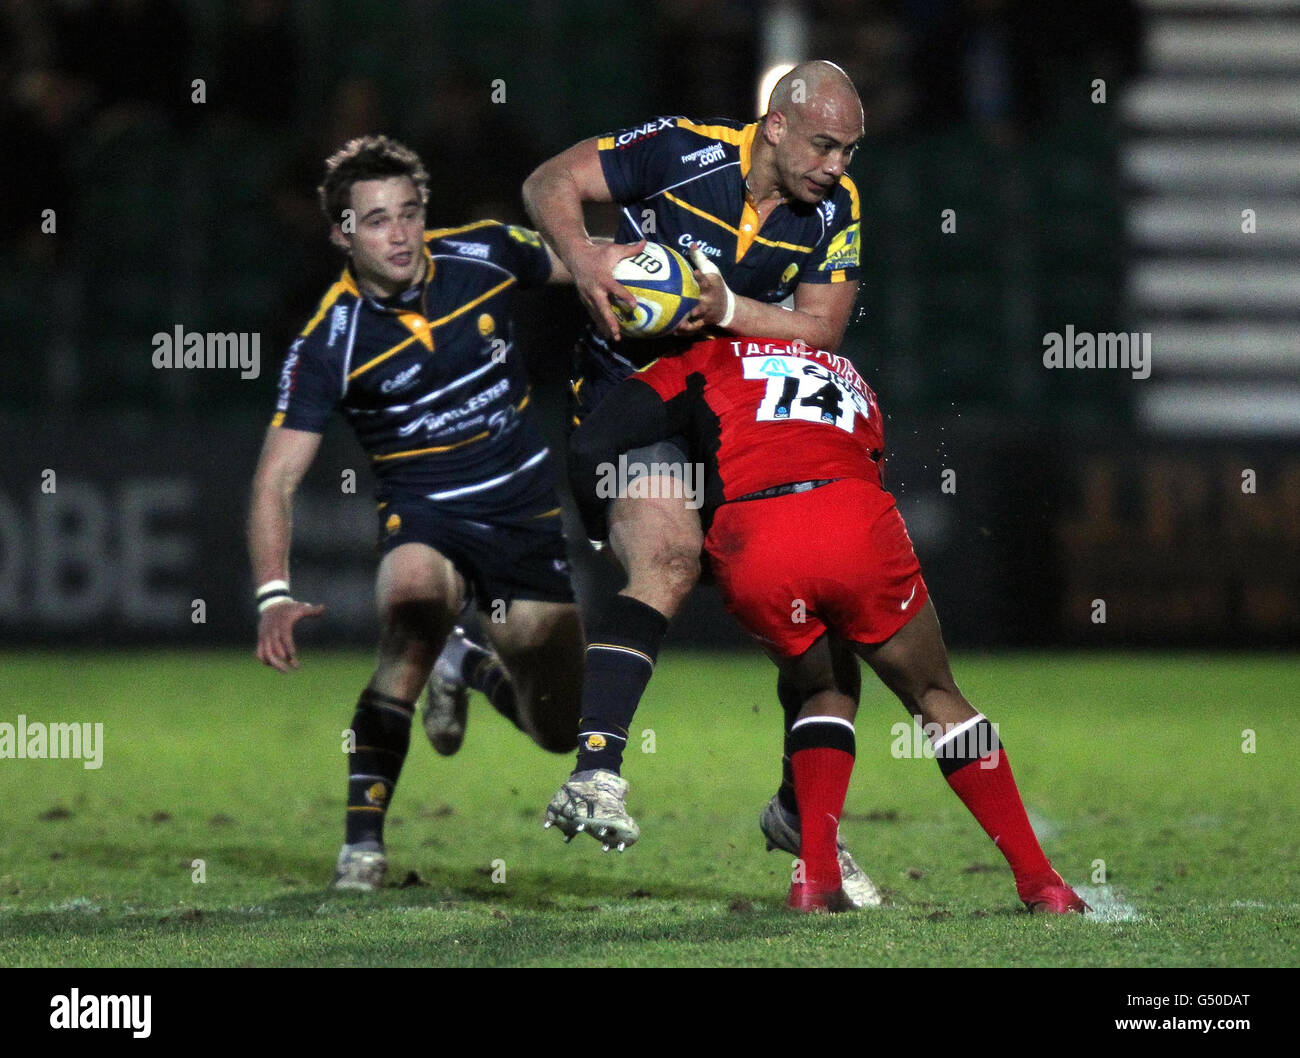 Worcester's Dale Rasmussen is tackled by Saracens Michael Tagicakiibau during the Aviva Premiership match at Sixways Stadium, Worcester. Stock Photo